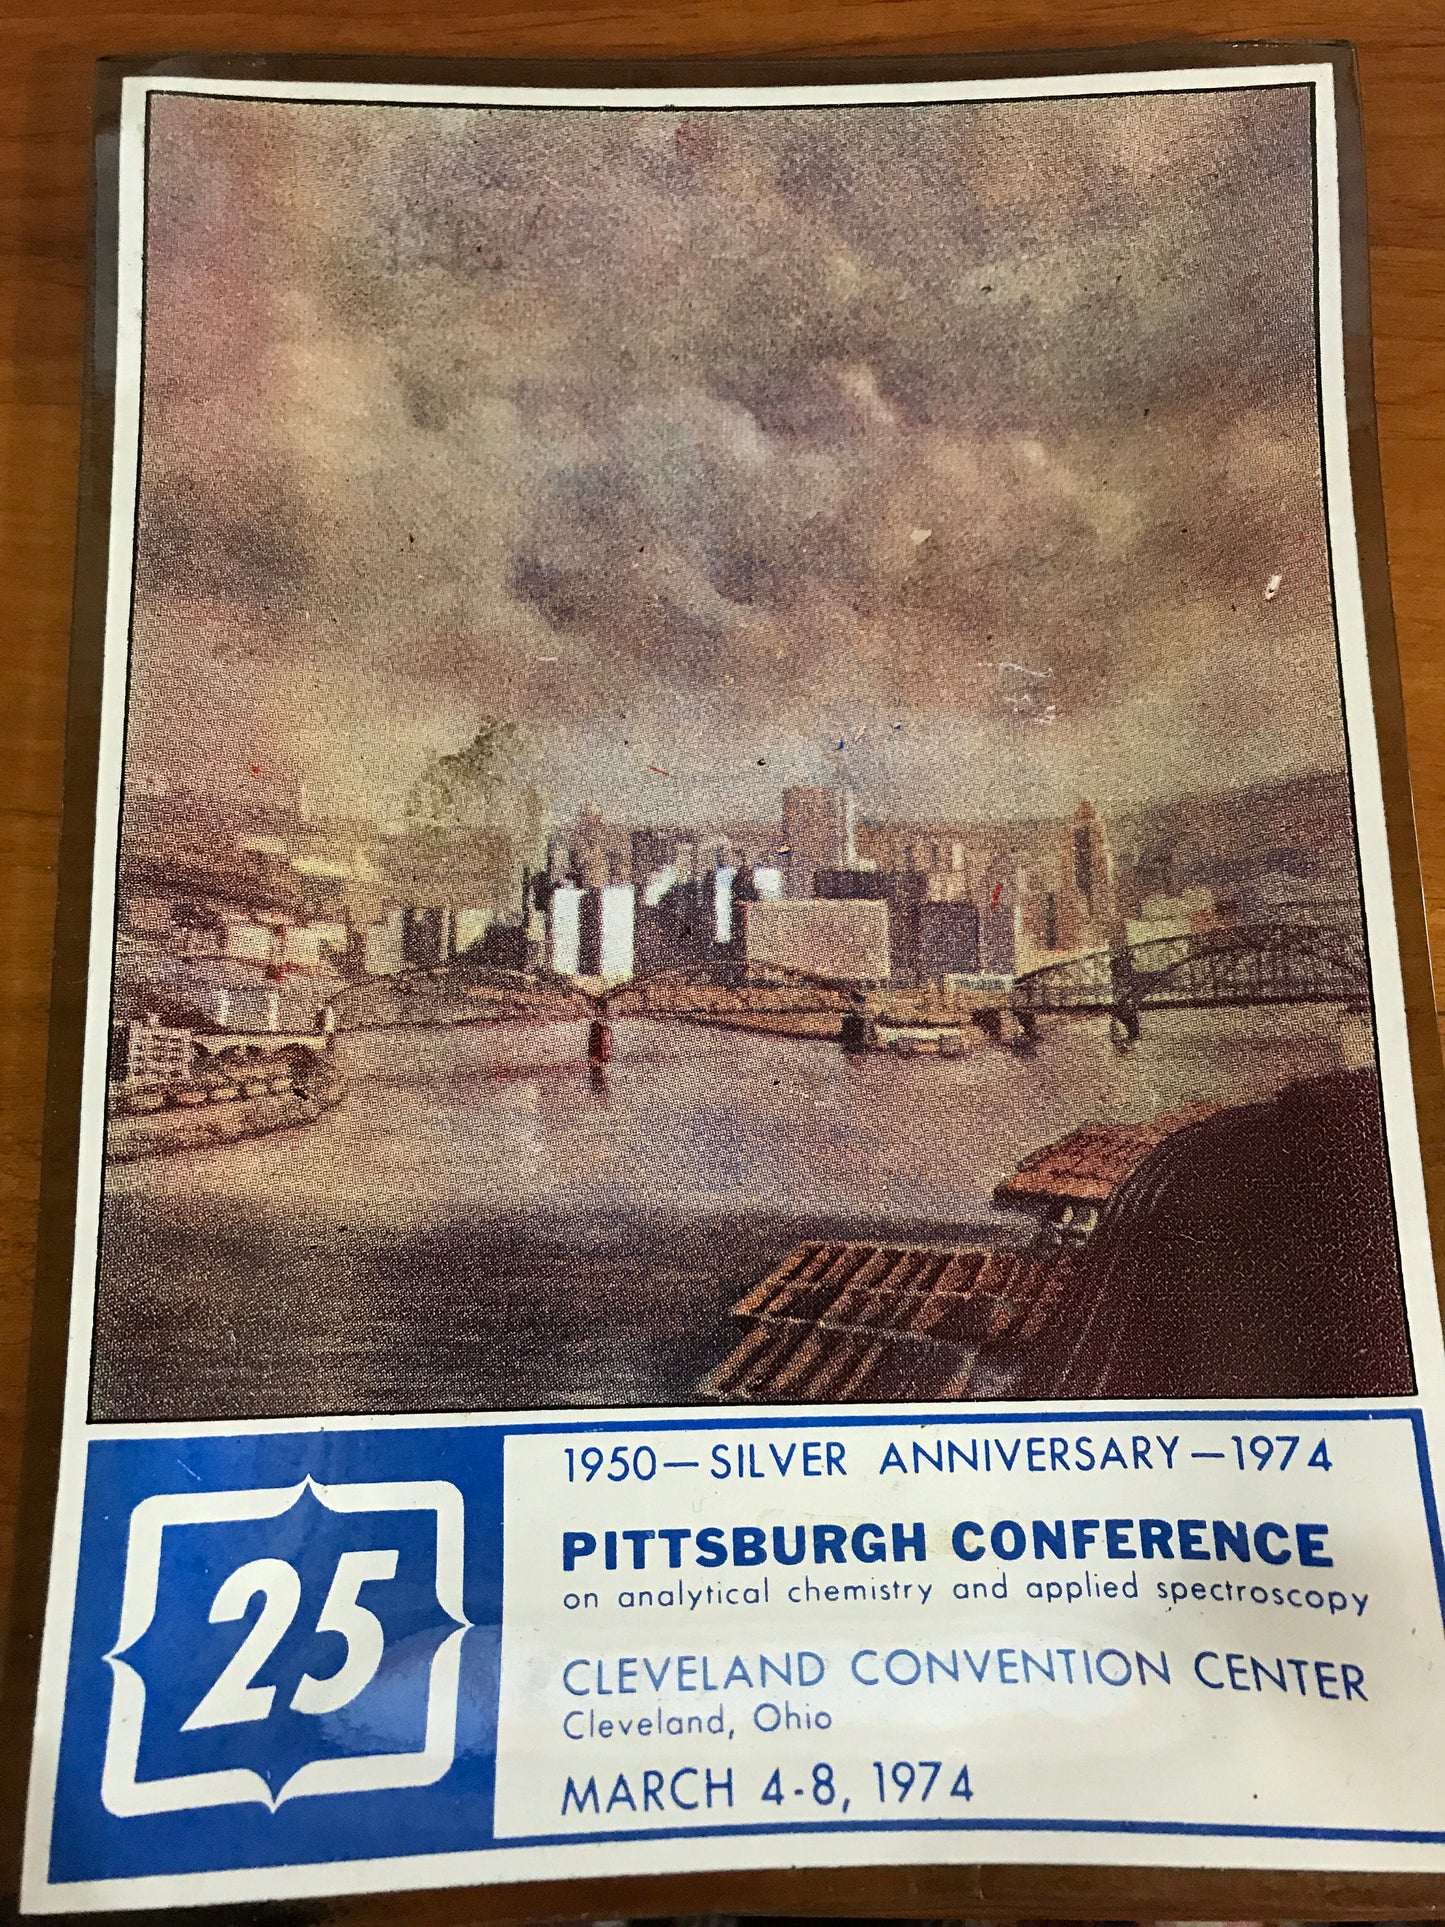 Pittsburgh Conference on Analytical Chemistry and Applied Spectroscopy, Silver Anniversary 1950-1974, Vintage Collectible Glass Dish